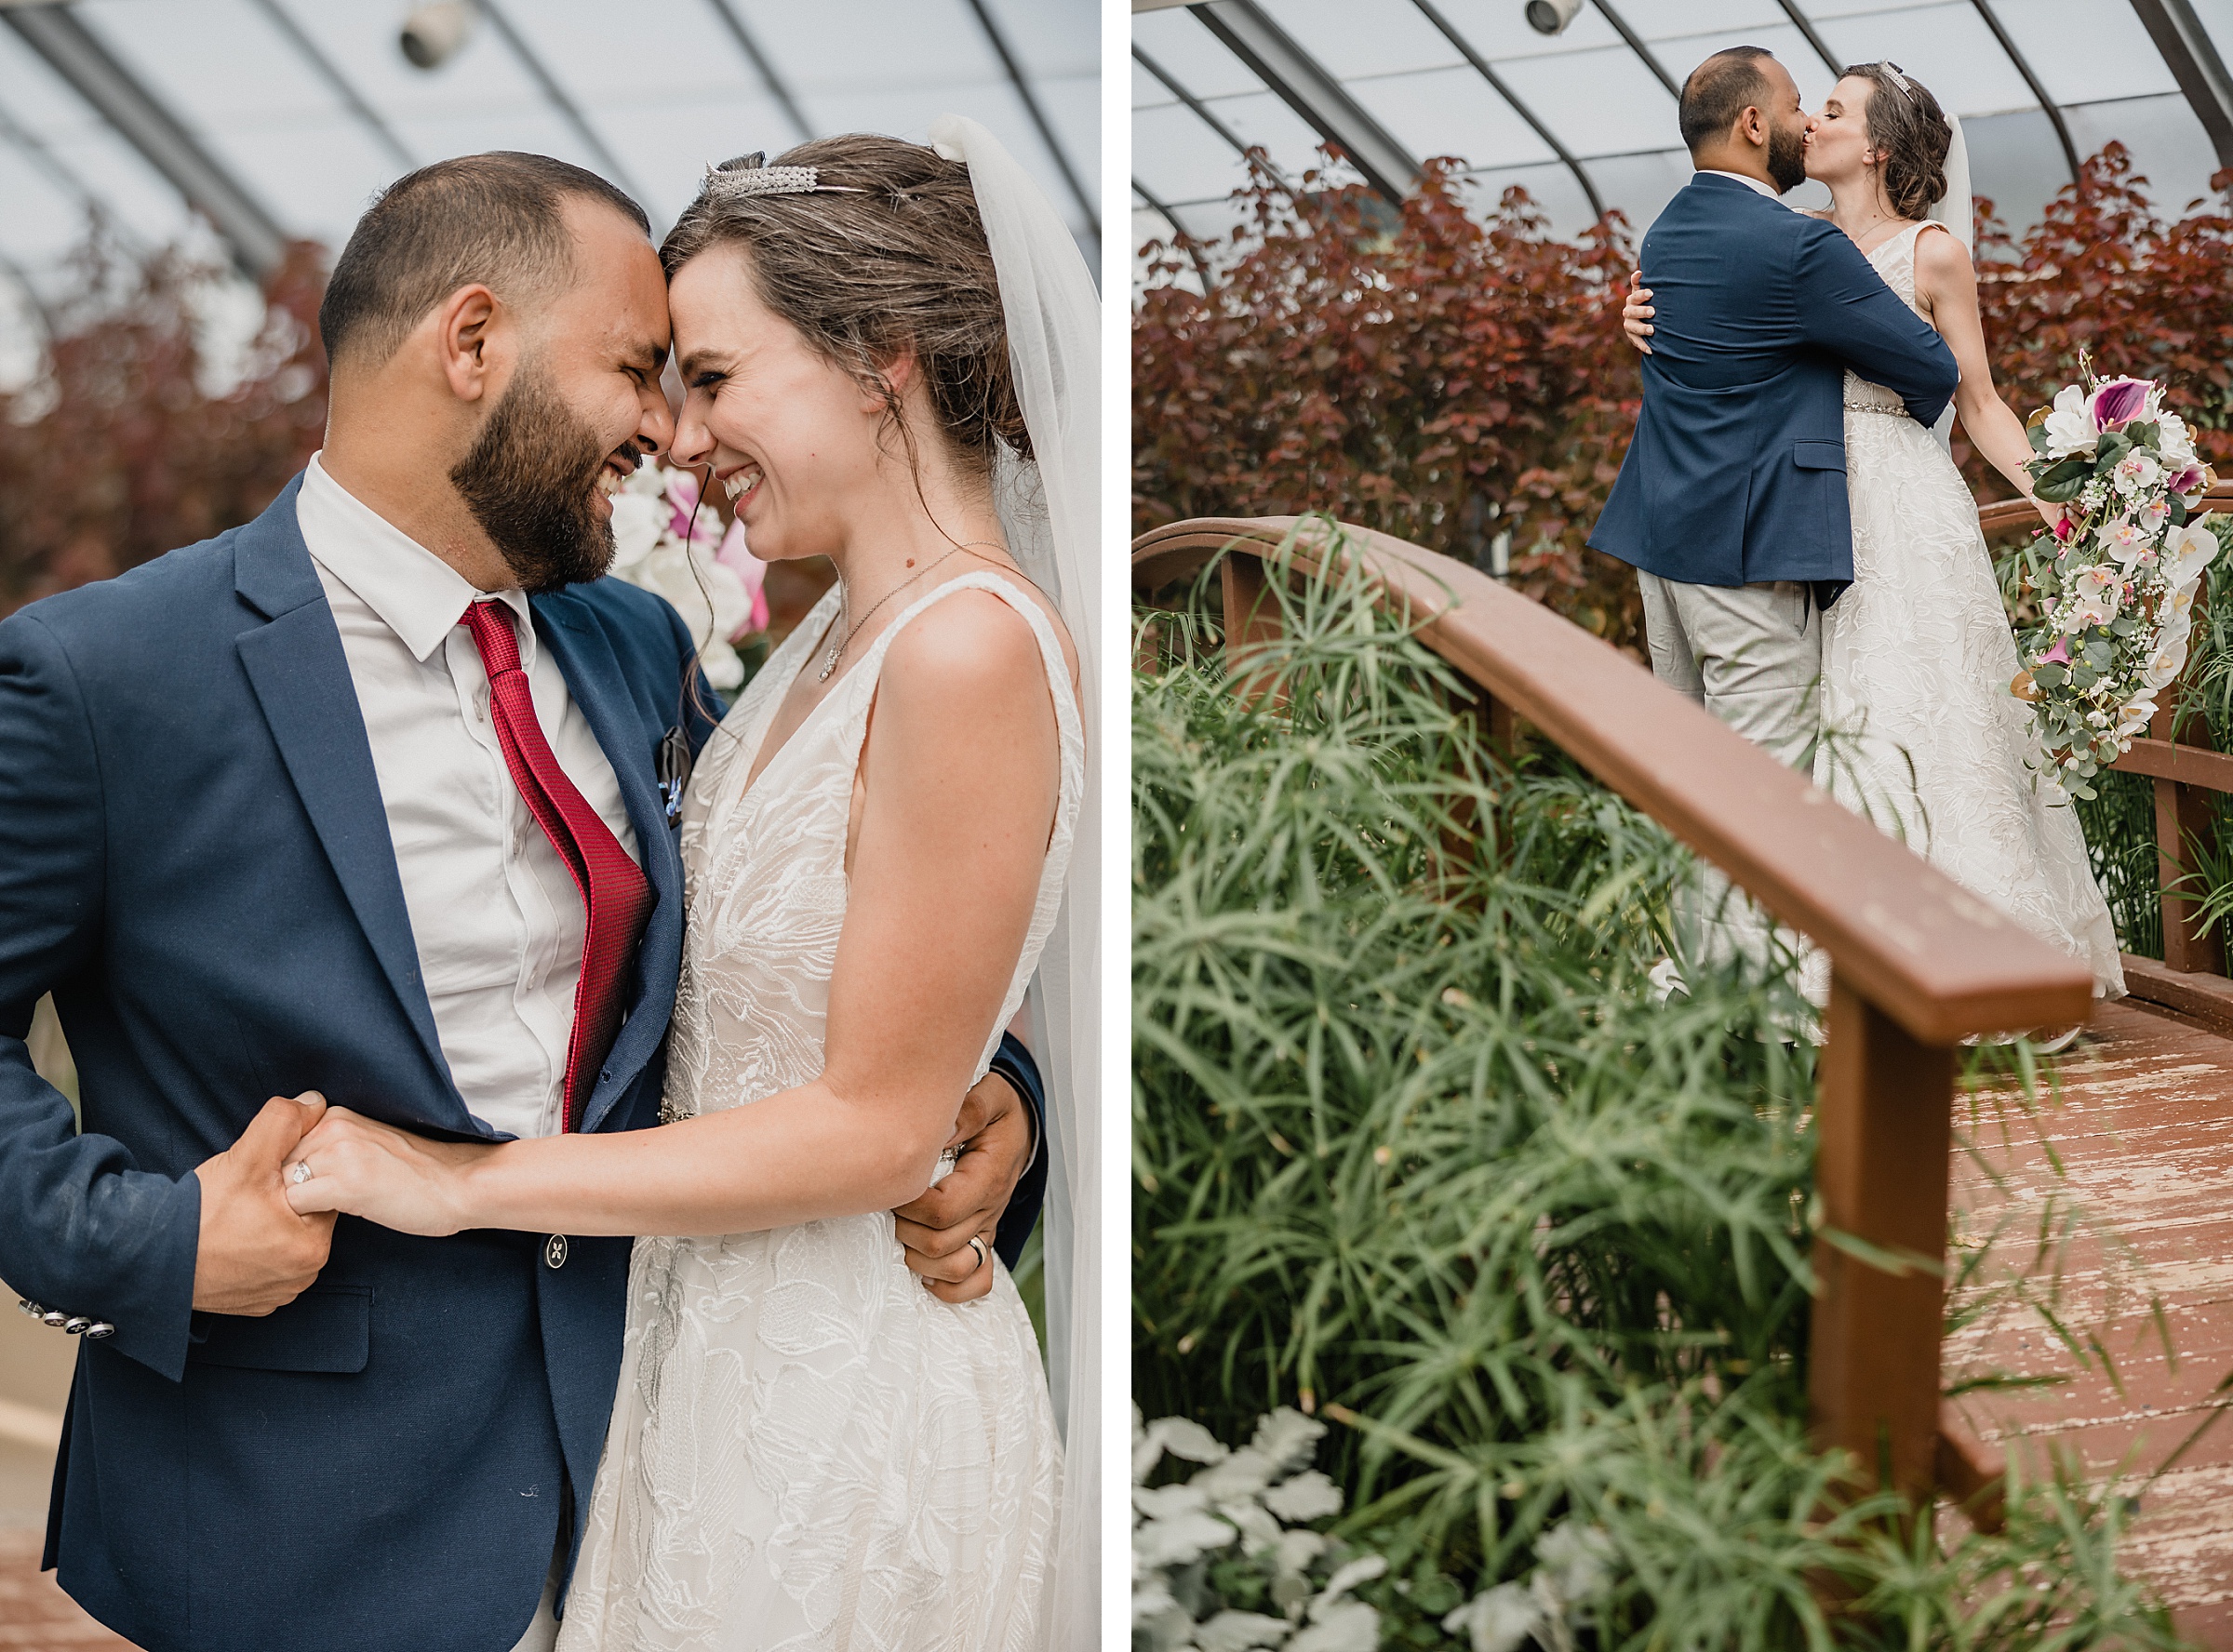 Couple embrace during their wedding at the Bird Haven Greenhouse & Conservatory in Joliet, Illinois